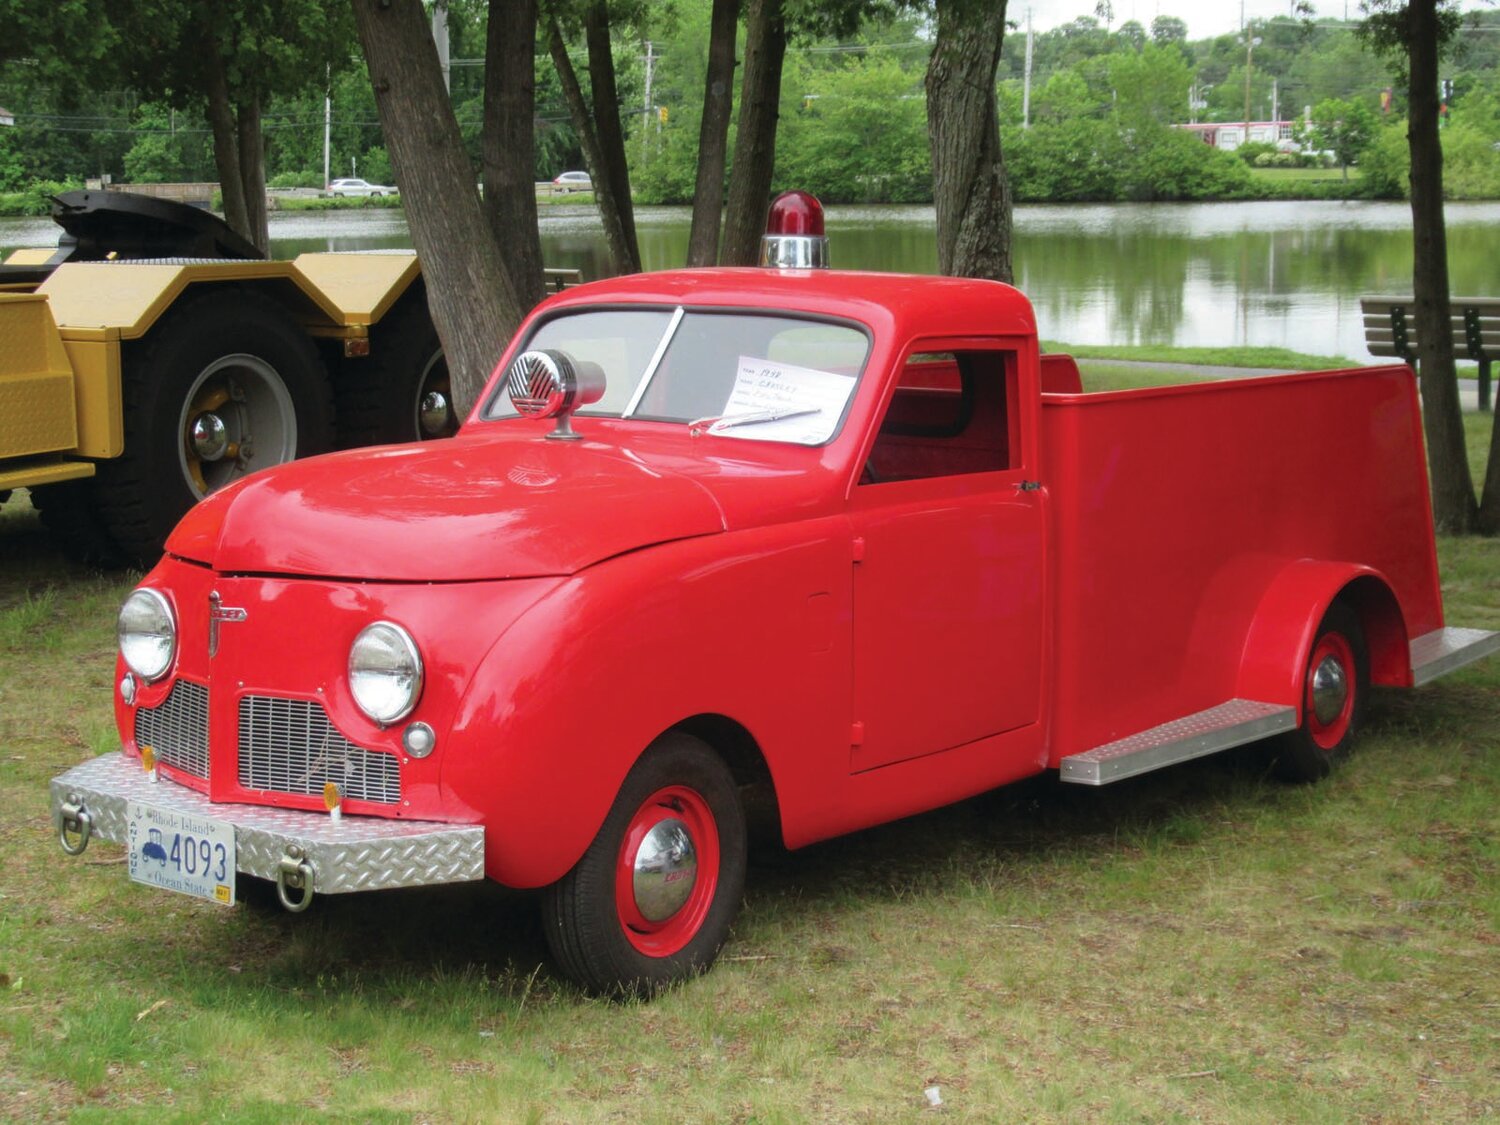 TRUCK TRANSFORMATION: This is a former Shriner’s vehicle that was later used as a firefighting apparatus.